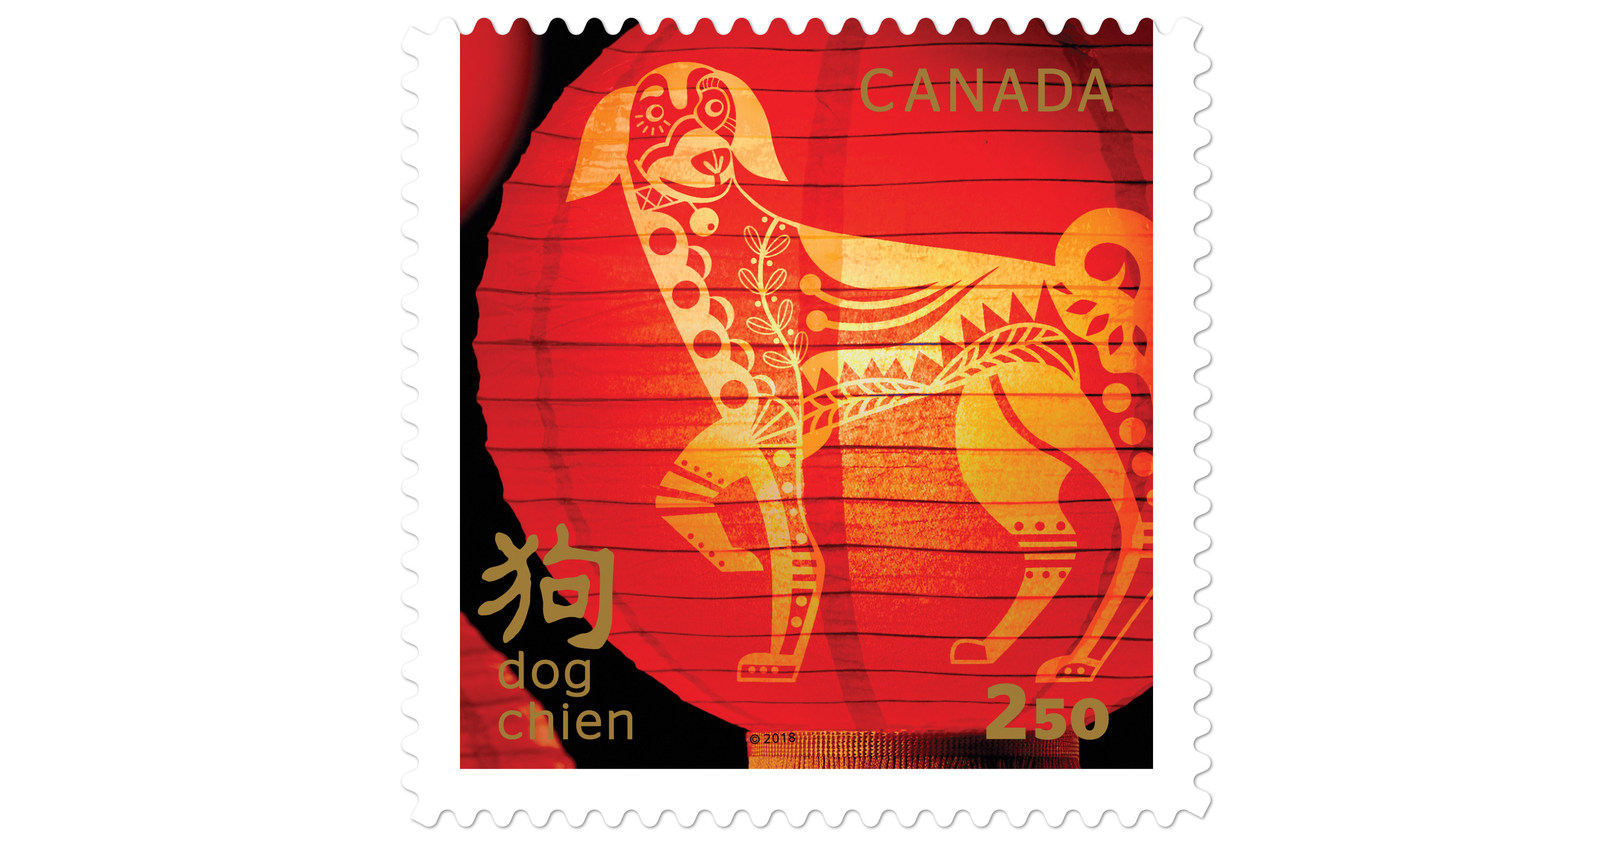 Canada Post Year of the Dog Lunar New Year stamps adorned in